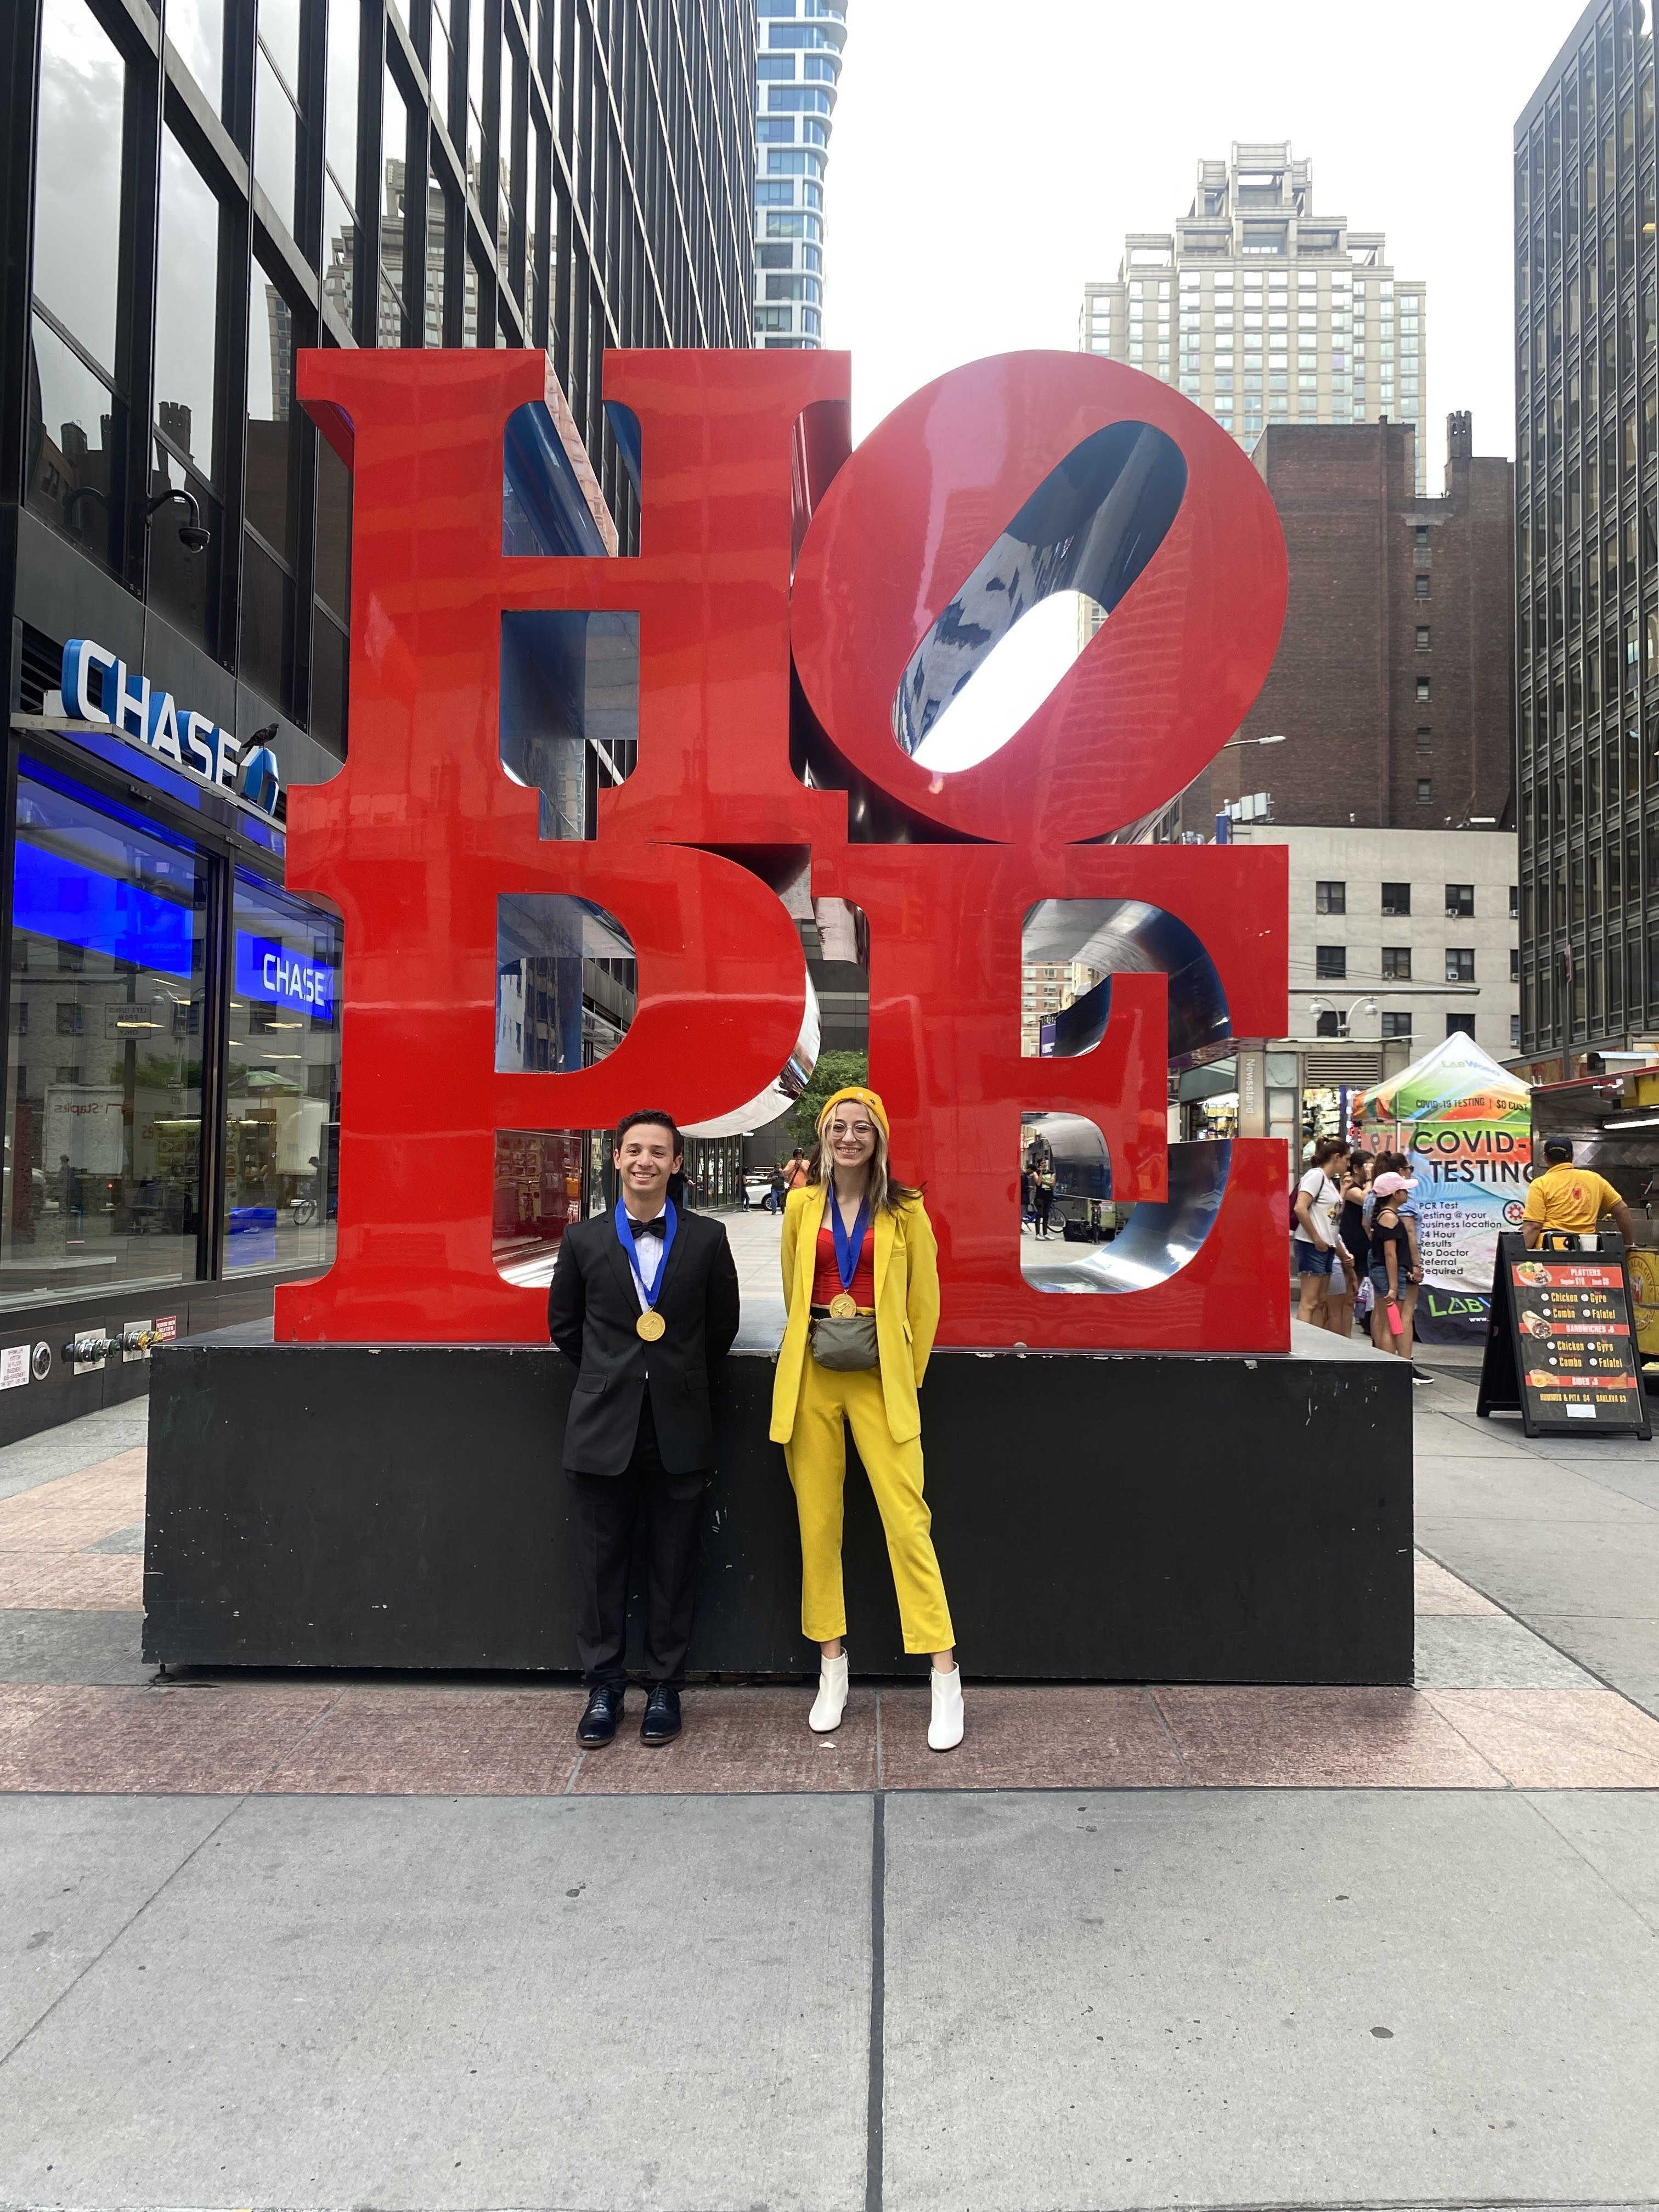 Gold Medal recipients Jared Sagan, Homestead High School, and Natalie Timmerman, Ottawa Hills High School, OH., in front of Robert Indiana’s HOPE sculpture after the Scholastic National Ceremony.